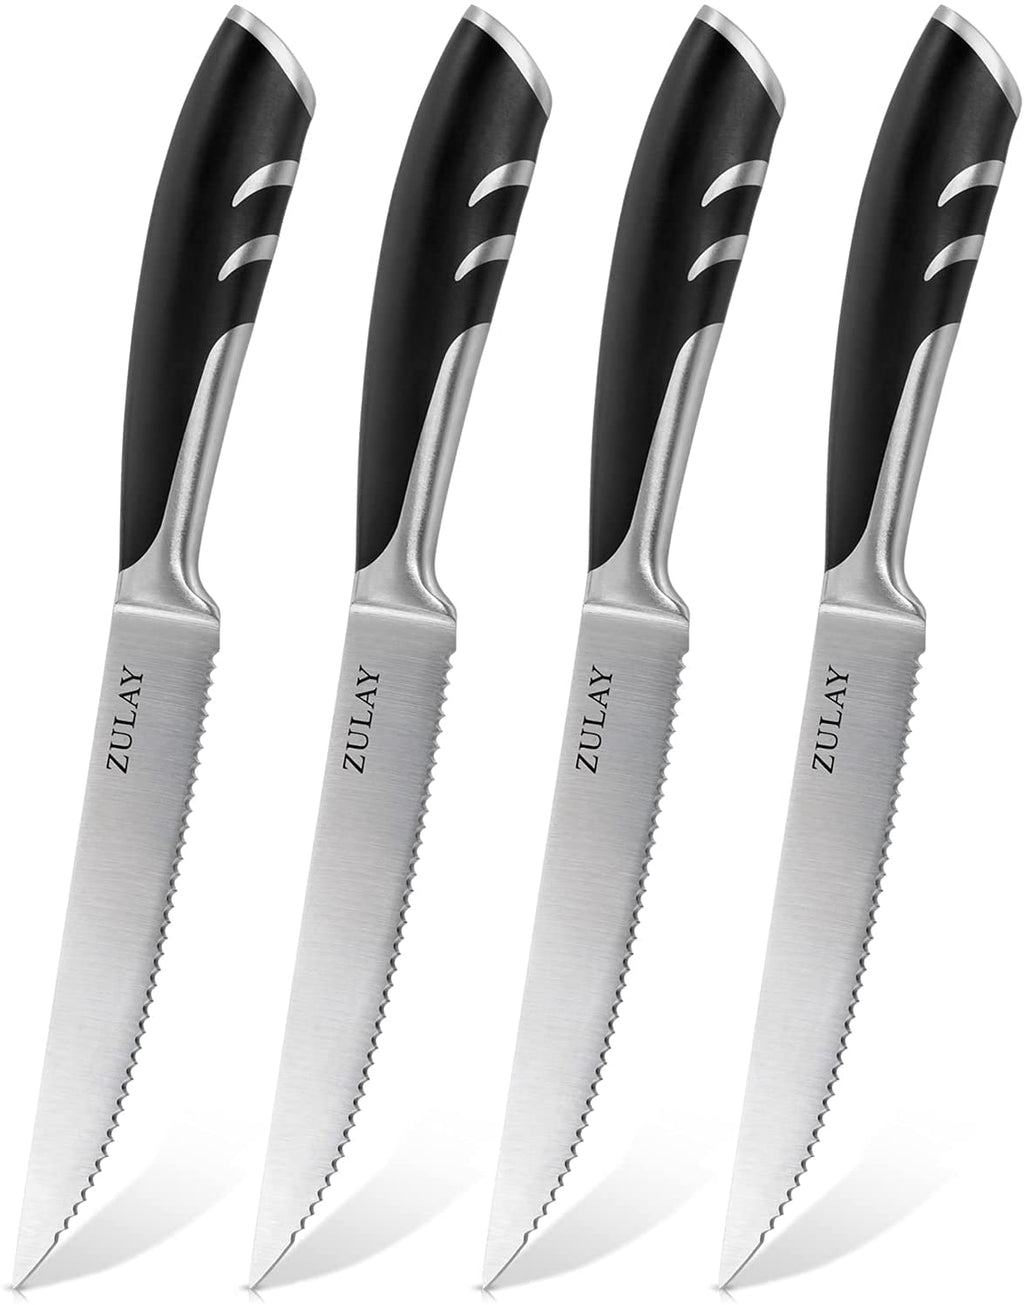 WIZEKA Steak Knives Set of 6,Serrated Steak Knives,Dishwasher Safe,1.4116  German Stainless Steel 4.5 Inches Steak Knife Set with Gift Box,Starry Sky